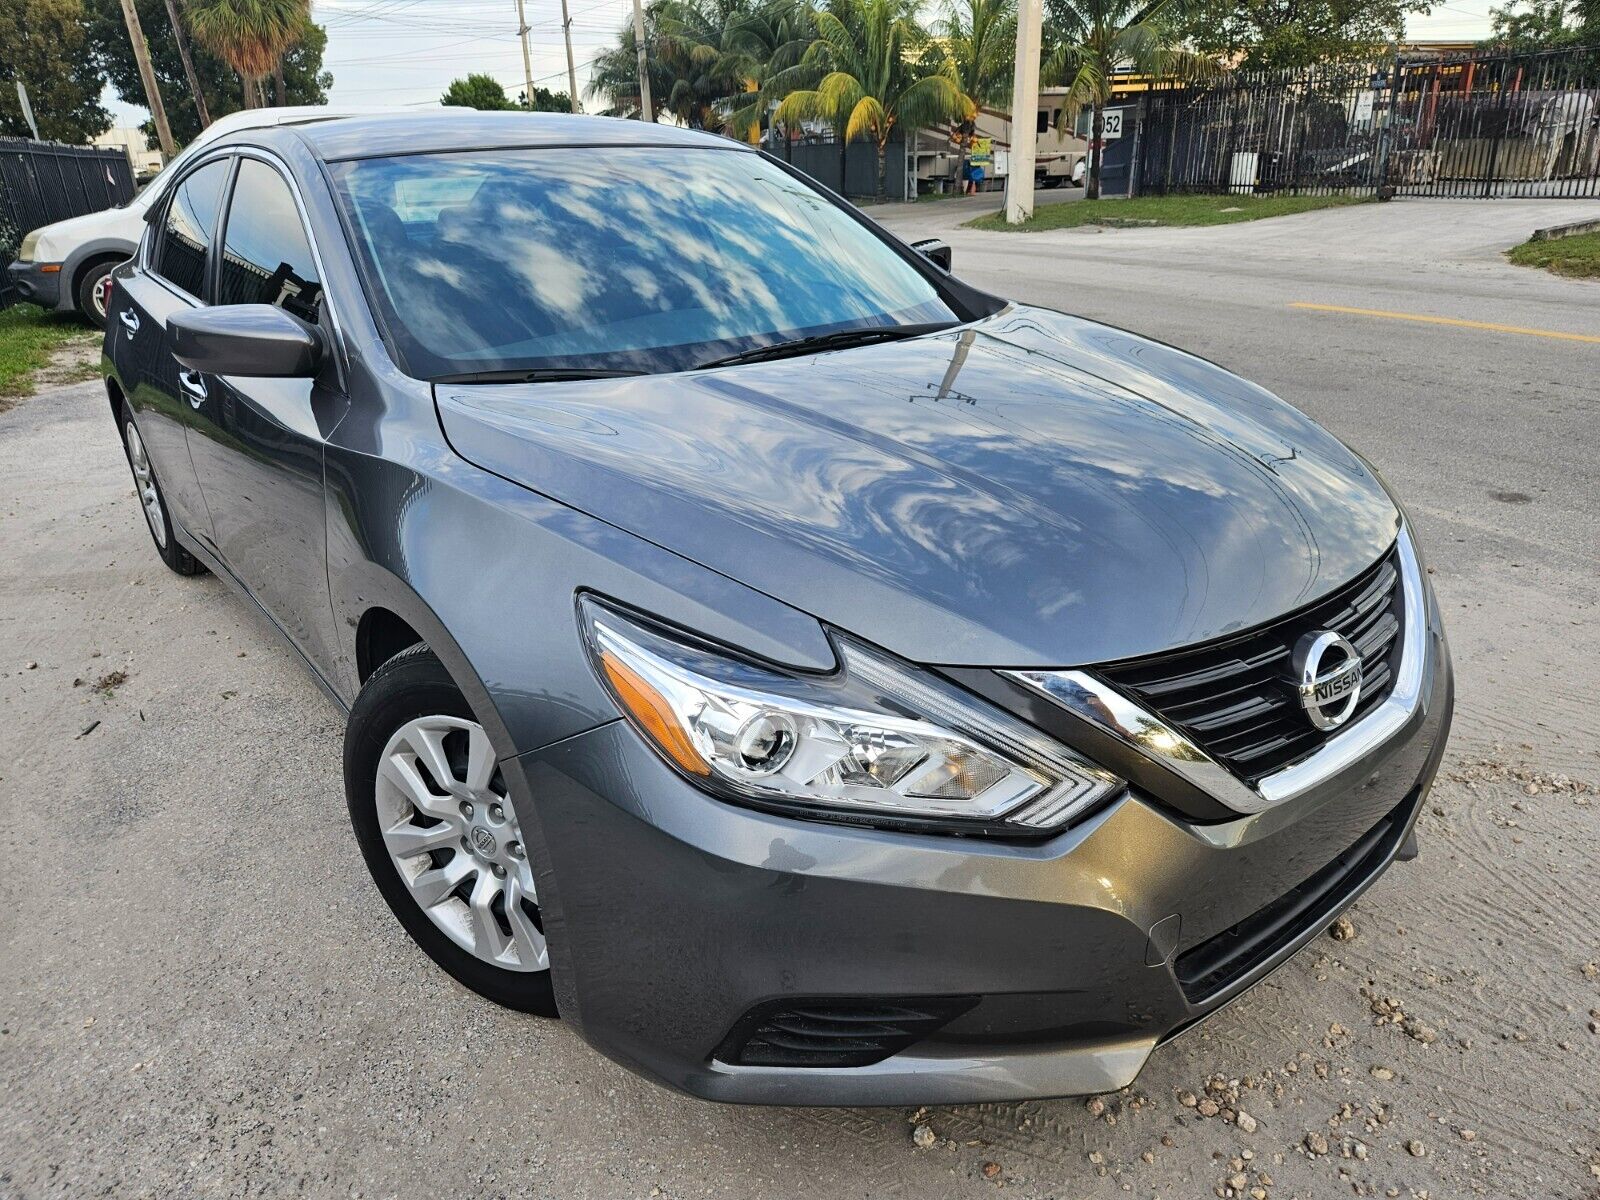 2018 NISSAN ALTIMA VERY LOW 67K MILES RUNS GREAT BEST OFFER